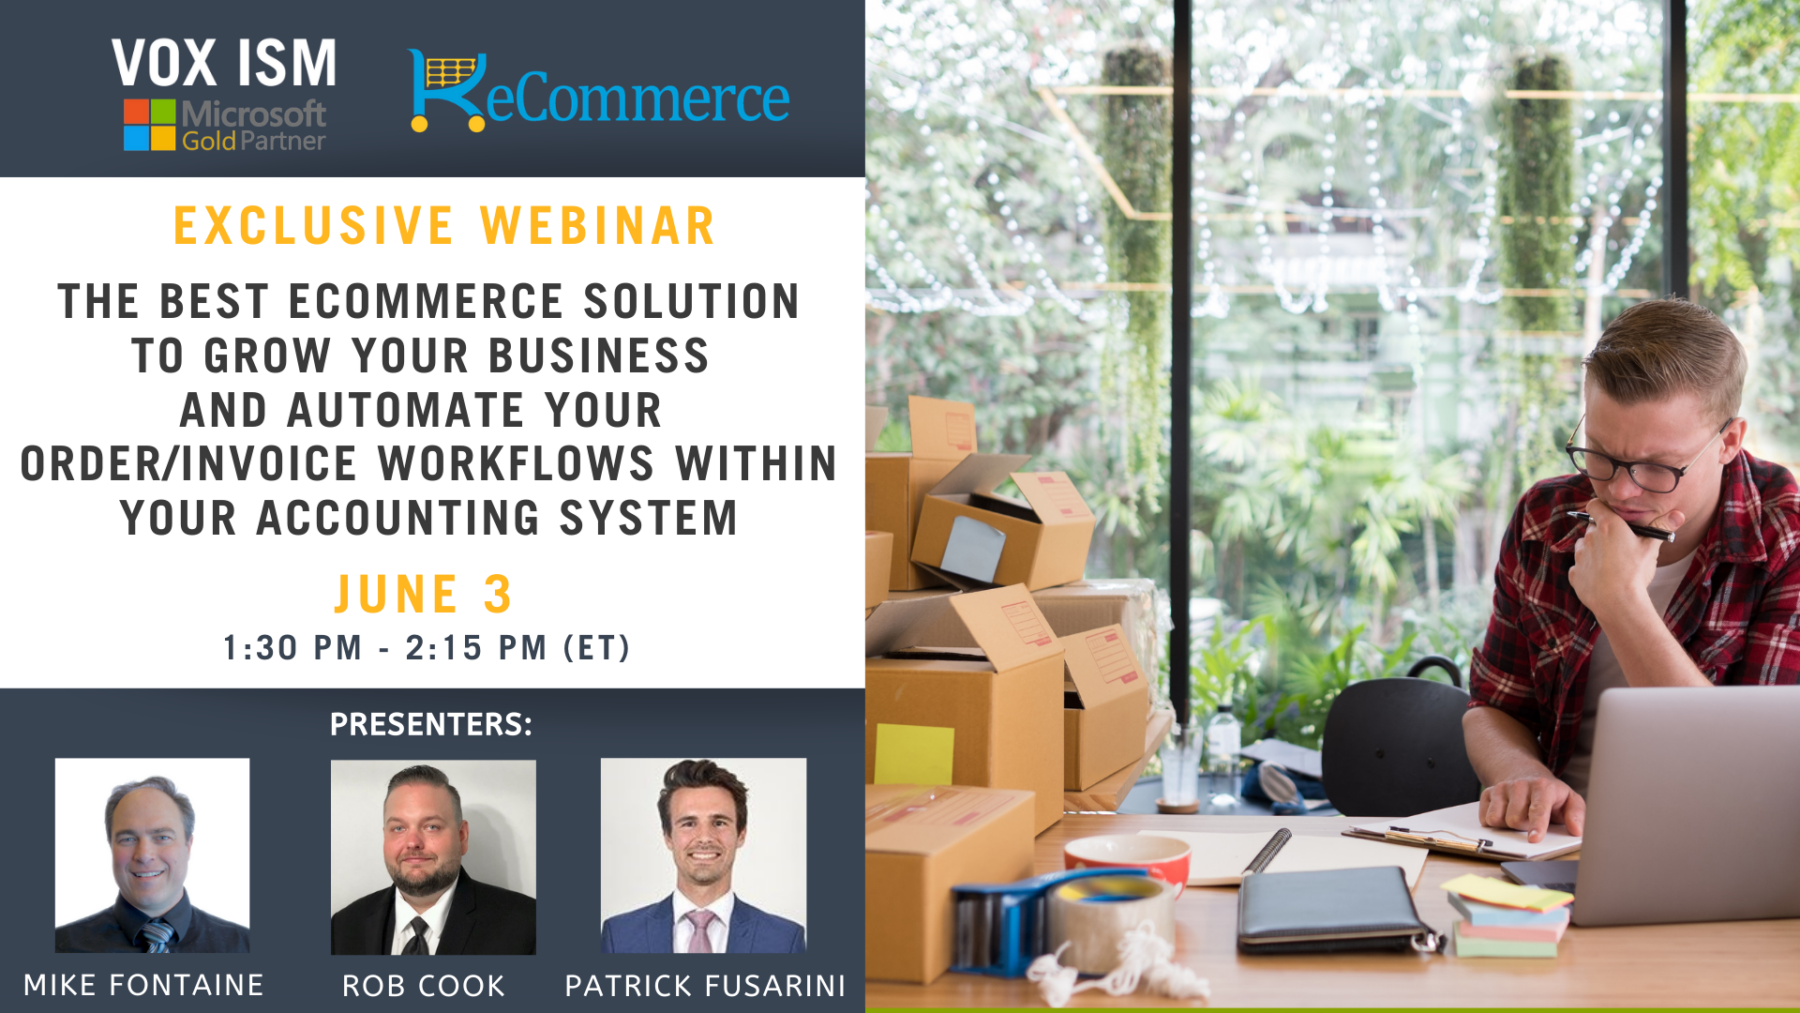 The Best e-Commerce solution to grow your business and automate your order/invoice workflows within your Accounting System - June 3 - Webinar